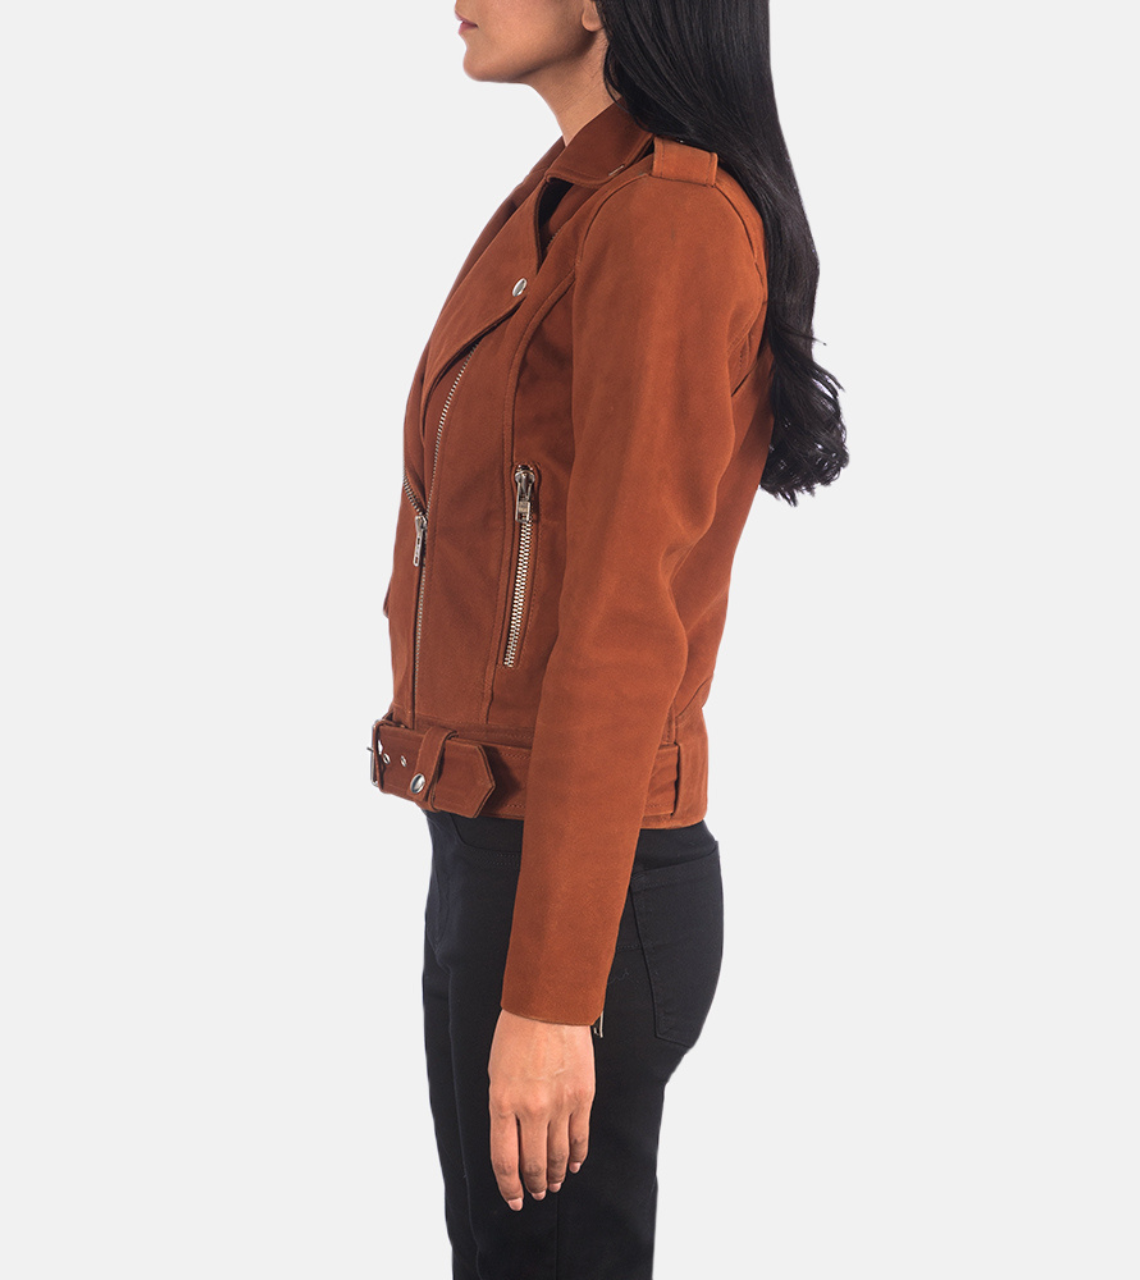 Giesto Women's Brown Suede Leather Jacket